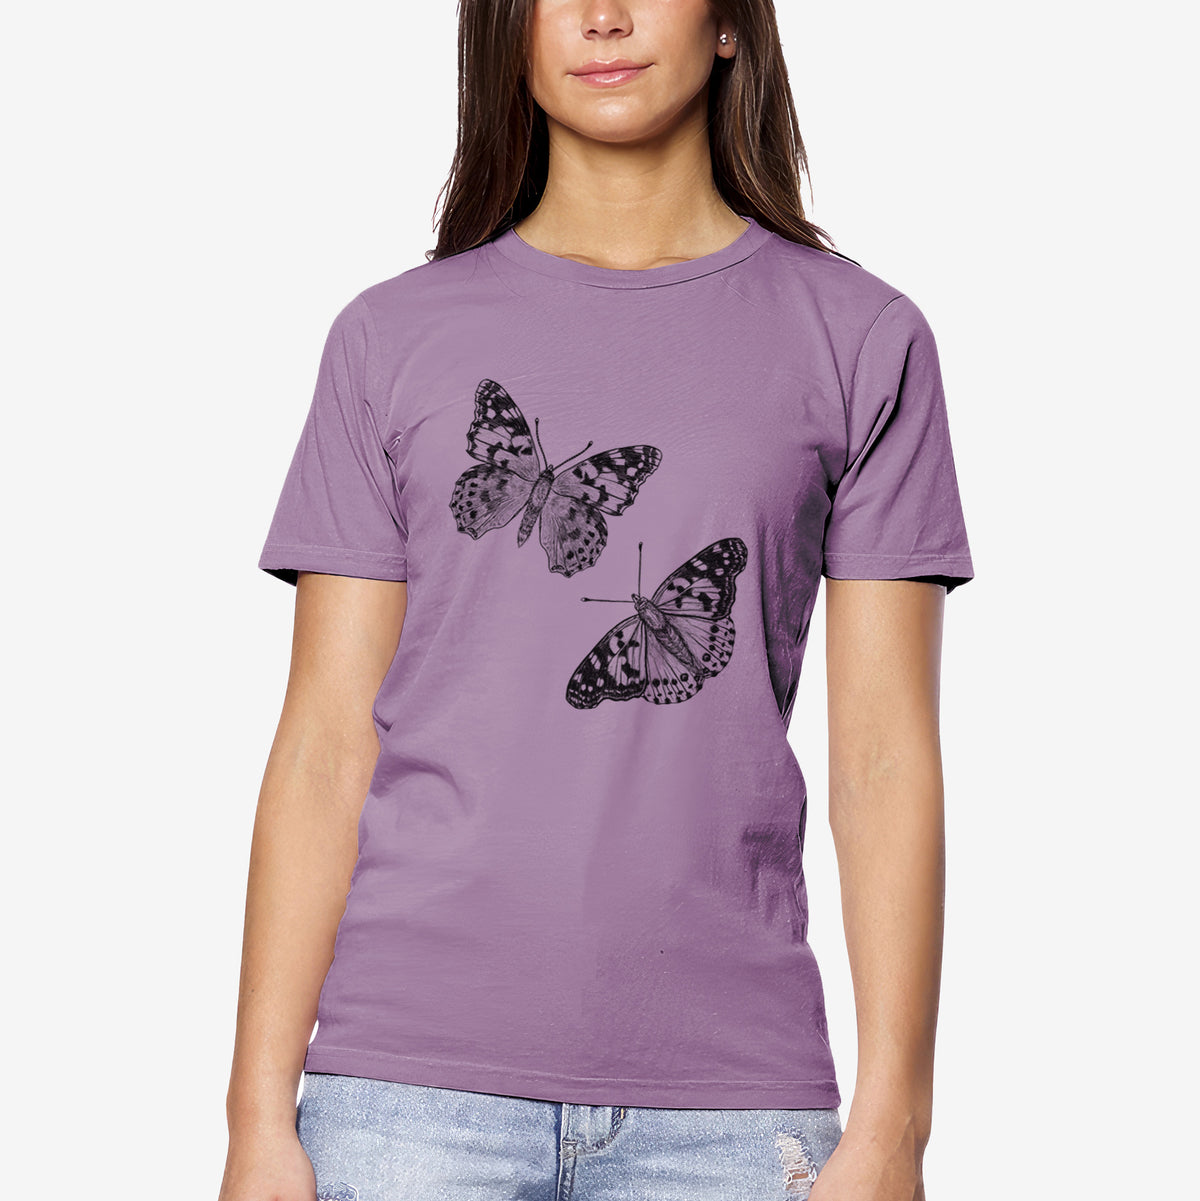 Painted Lady Butterflies - Unisex Crewneck - Made in USA - 100% Organic Cotton